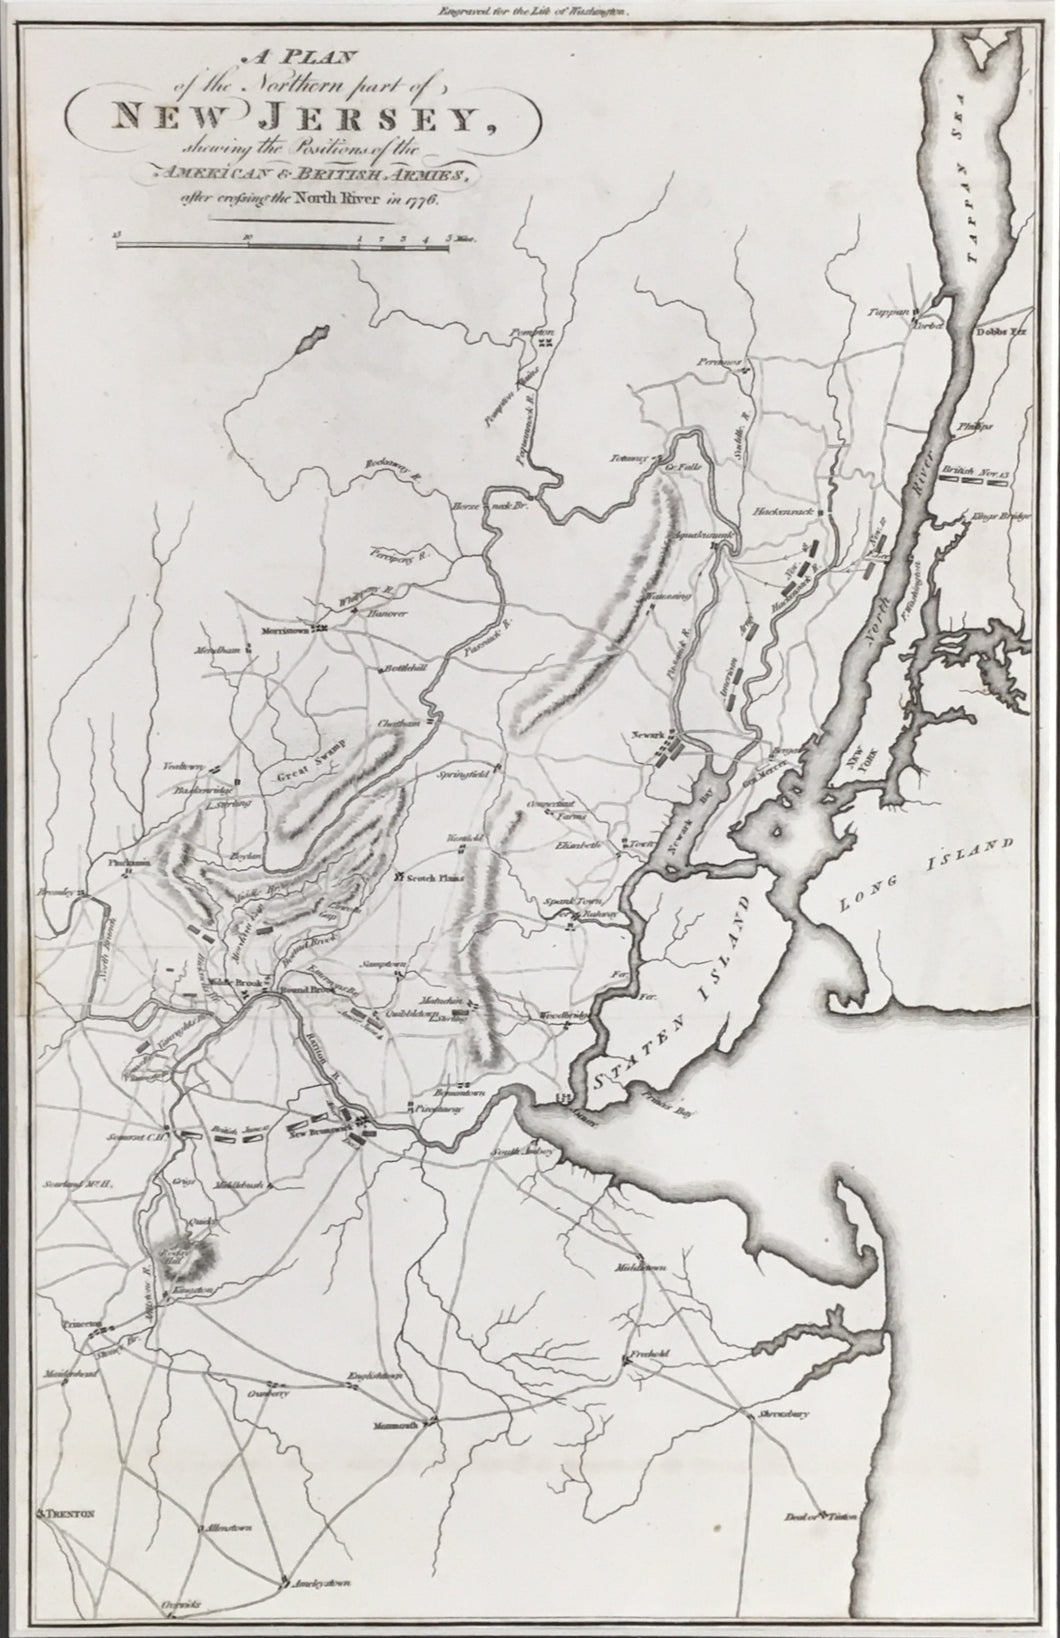 Lewis, Samuel “Plan of the Northern part of New Jersey Showing the Positions of the American & British Armies After Crossing the North River in 1776”